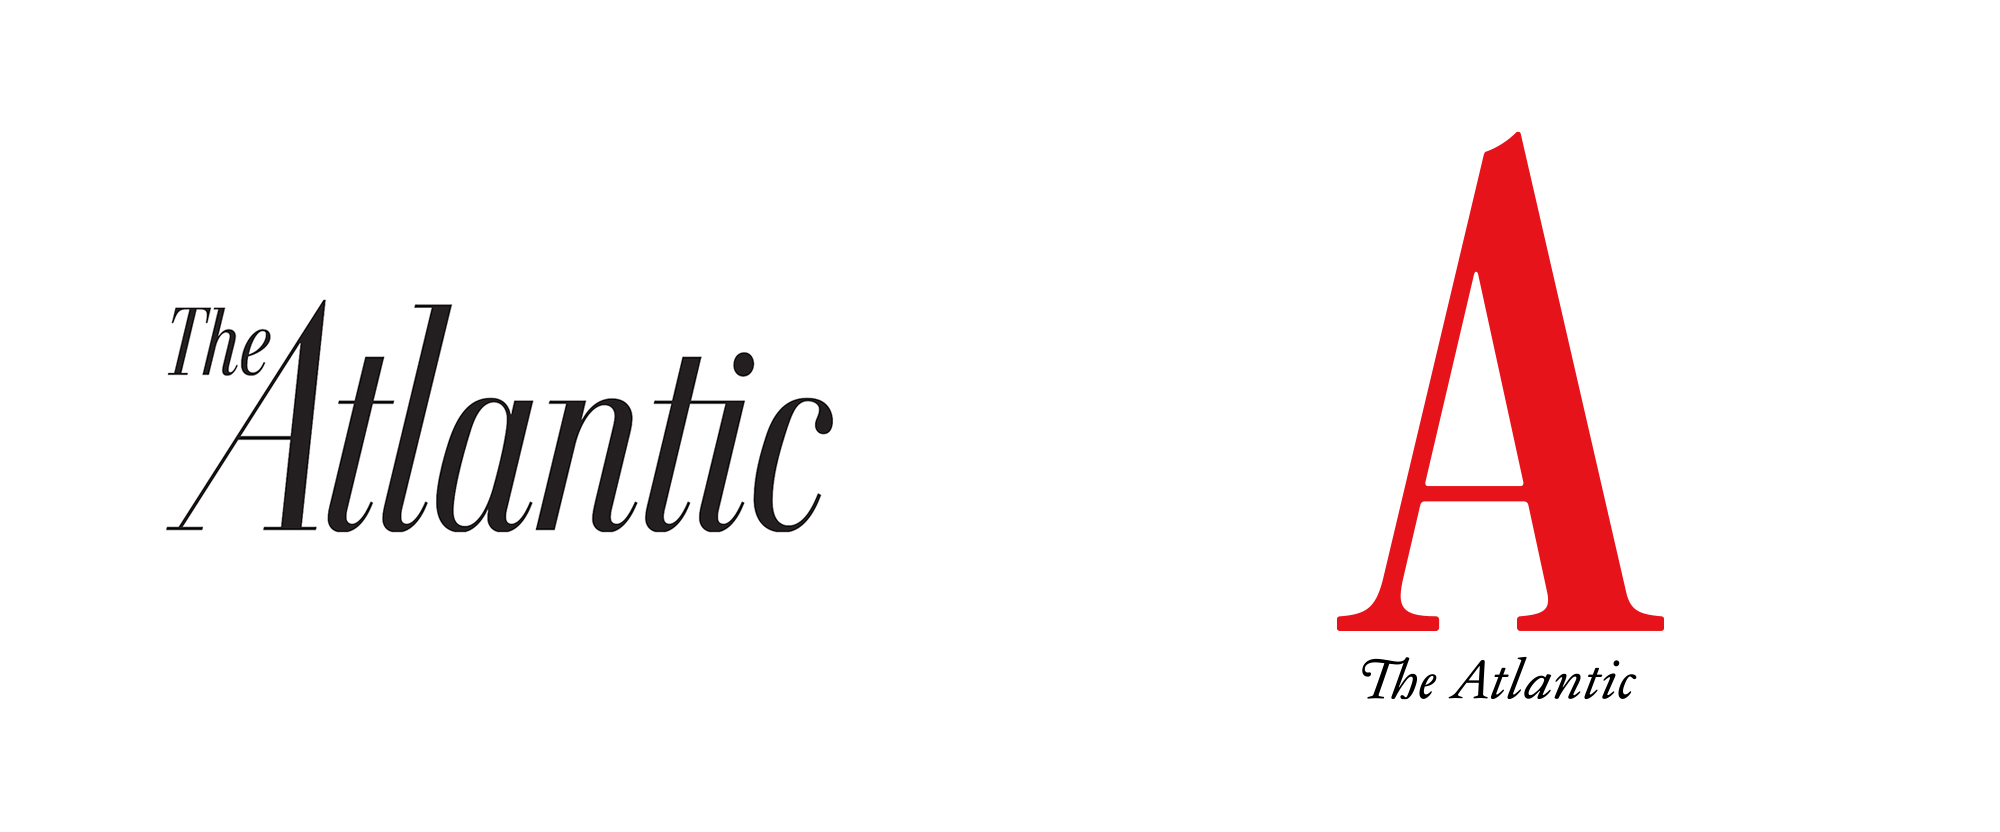 Noted New Logo and Cover for The Atlantic done Inhouse